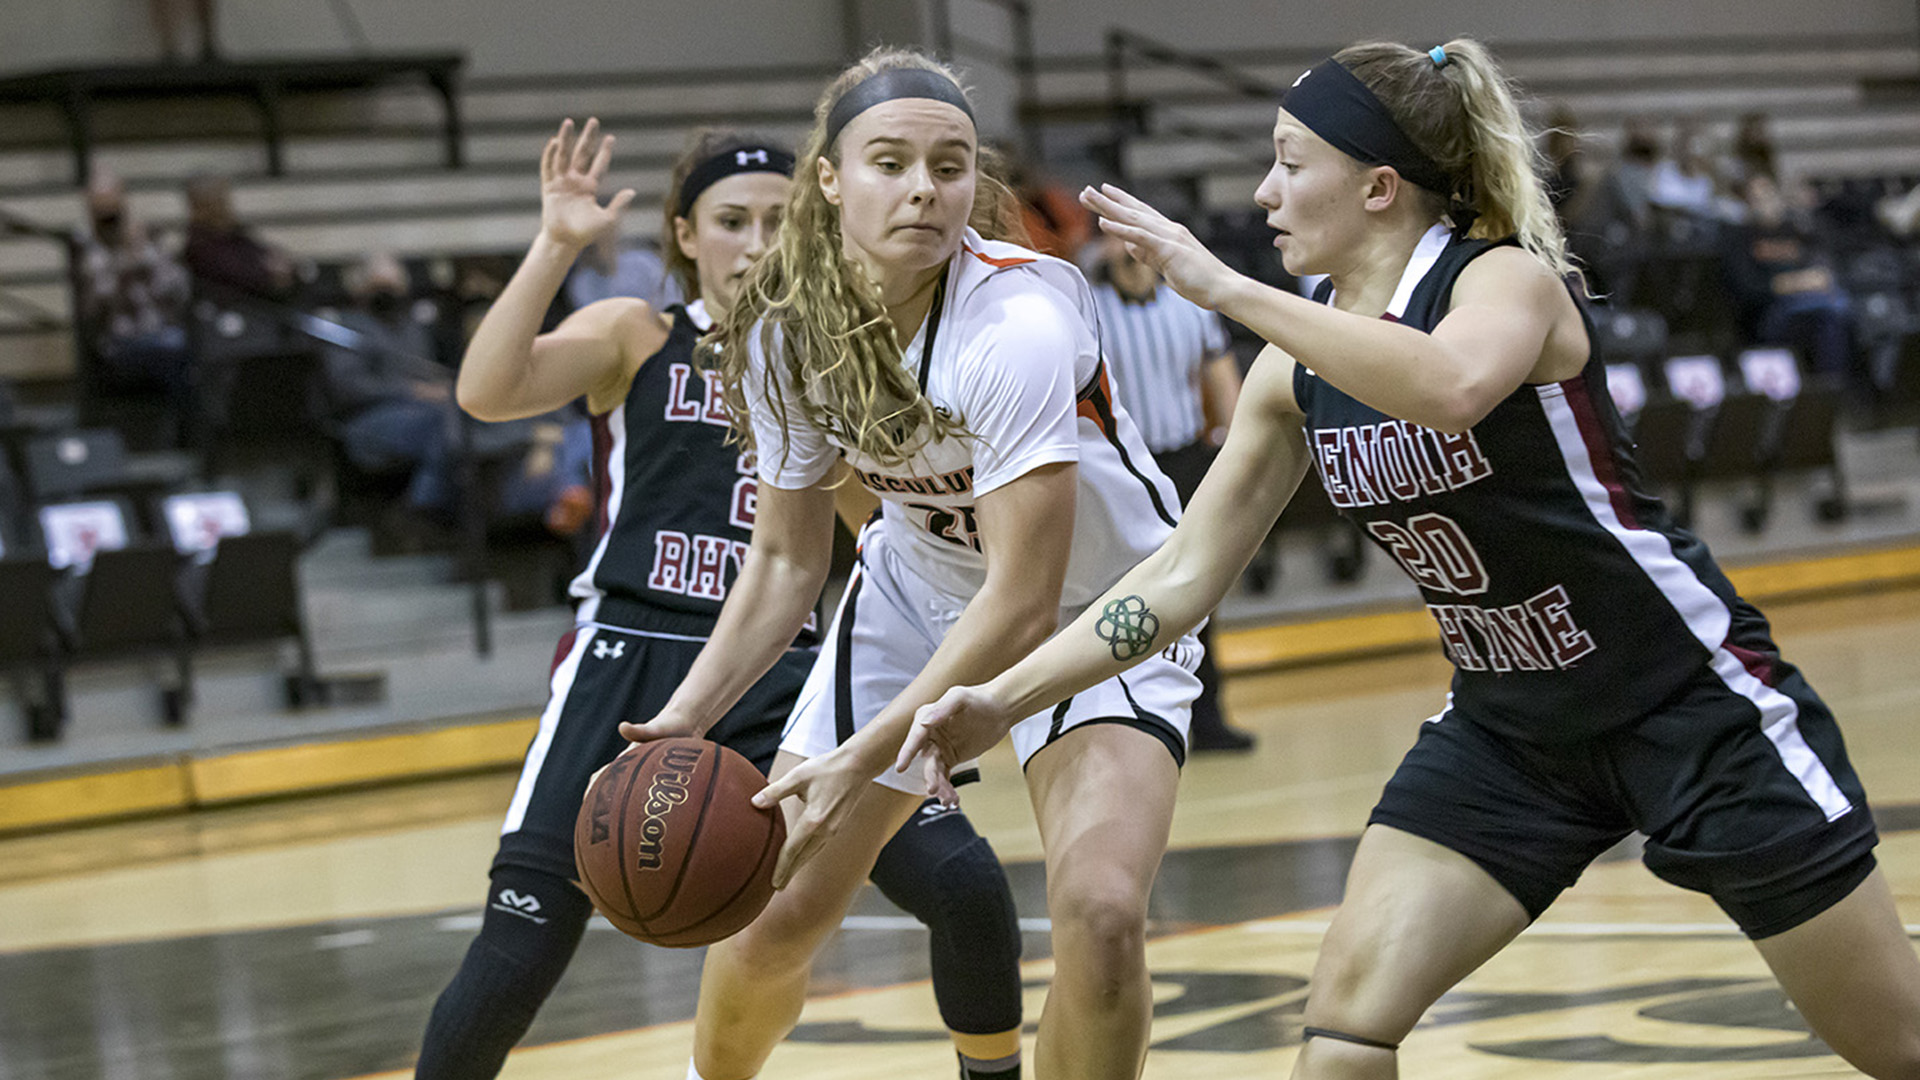 Another Sutton double-double boosts Pioneers to 61-54 win at Lenoir-Rhyne